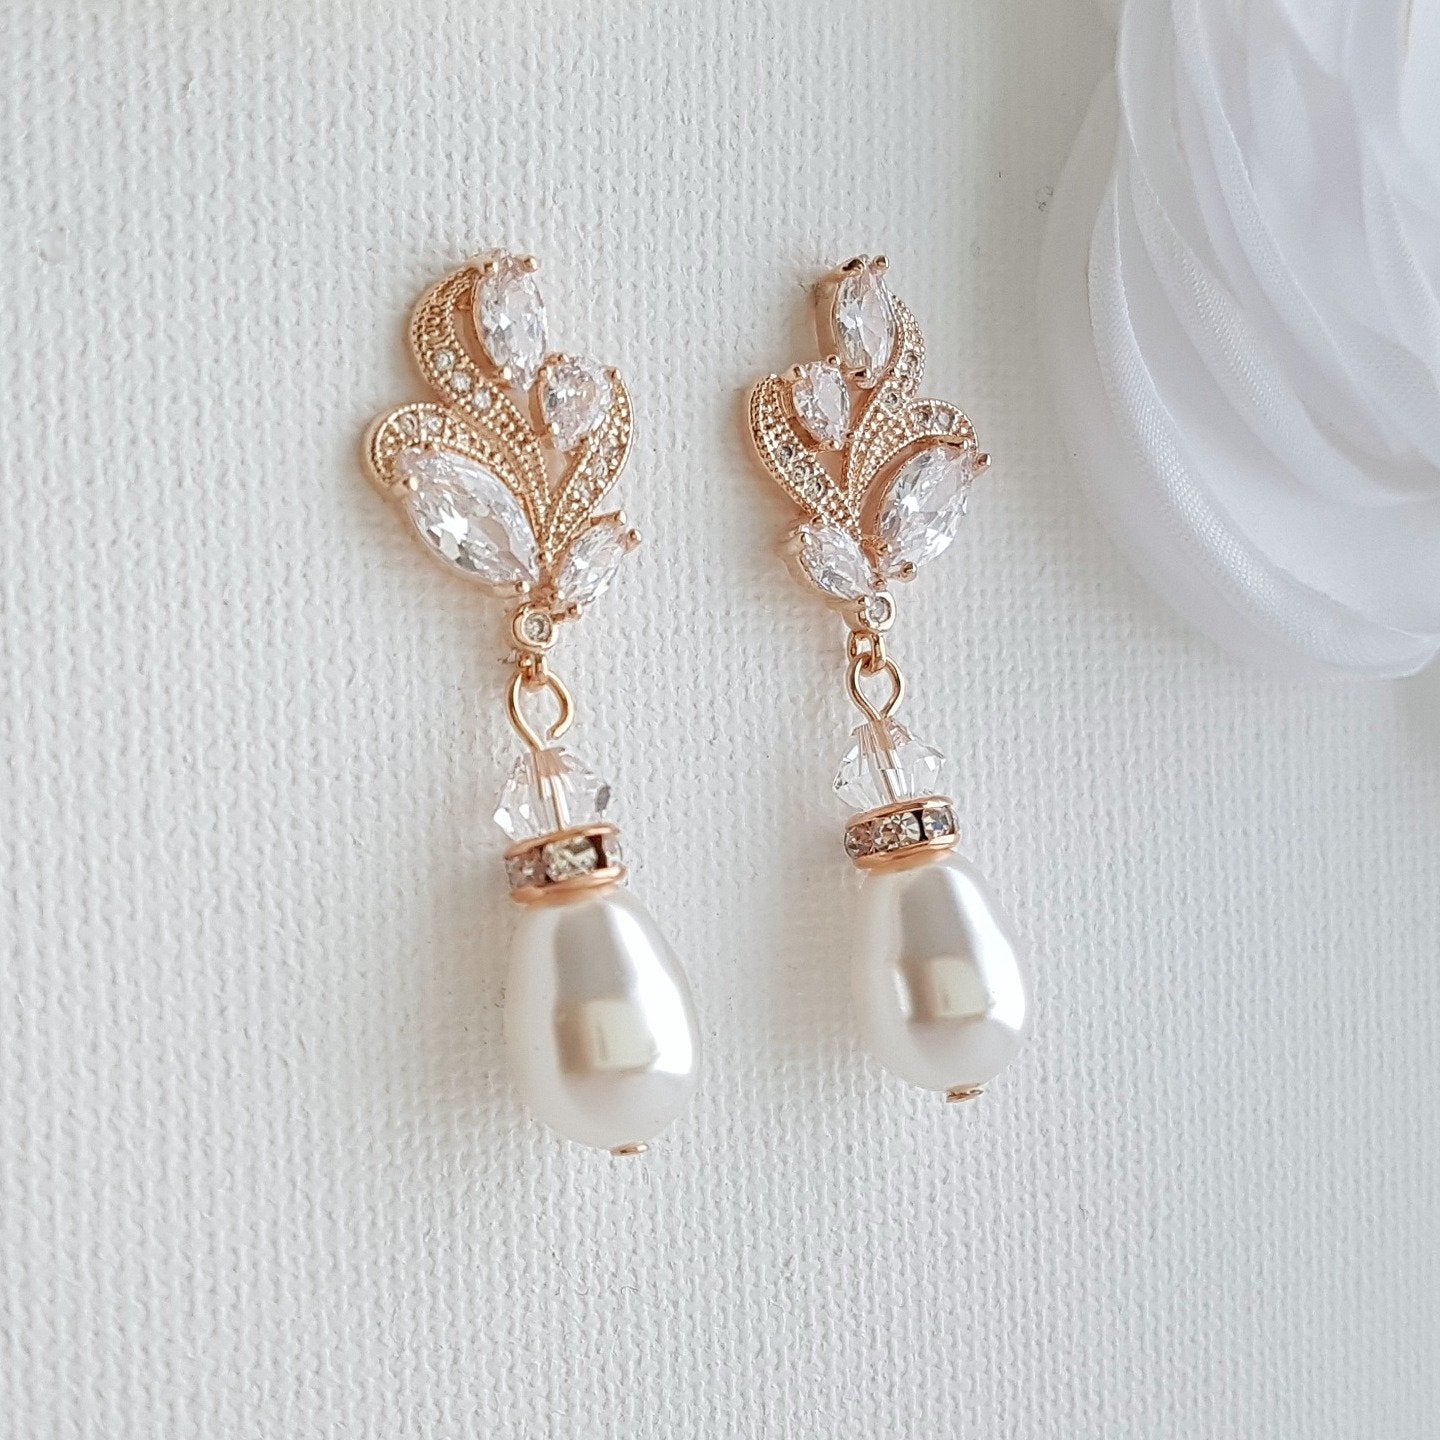 Silver Bridal Earrings With Pearl Drops-Wavy - PoetryDesigns